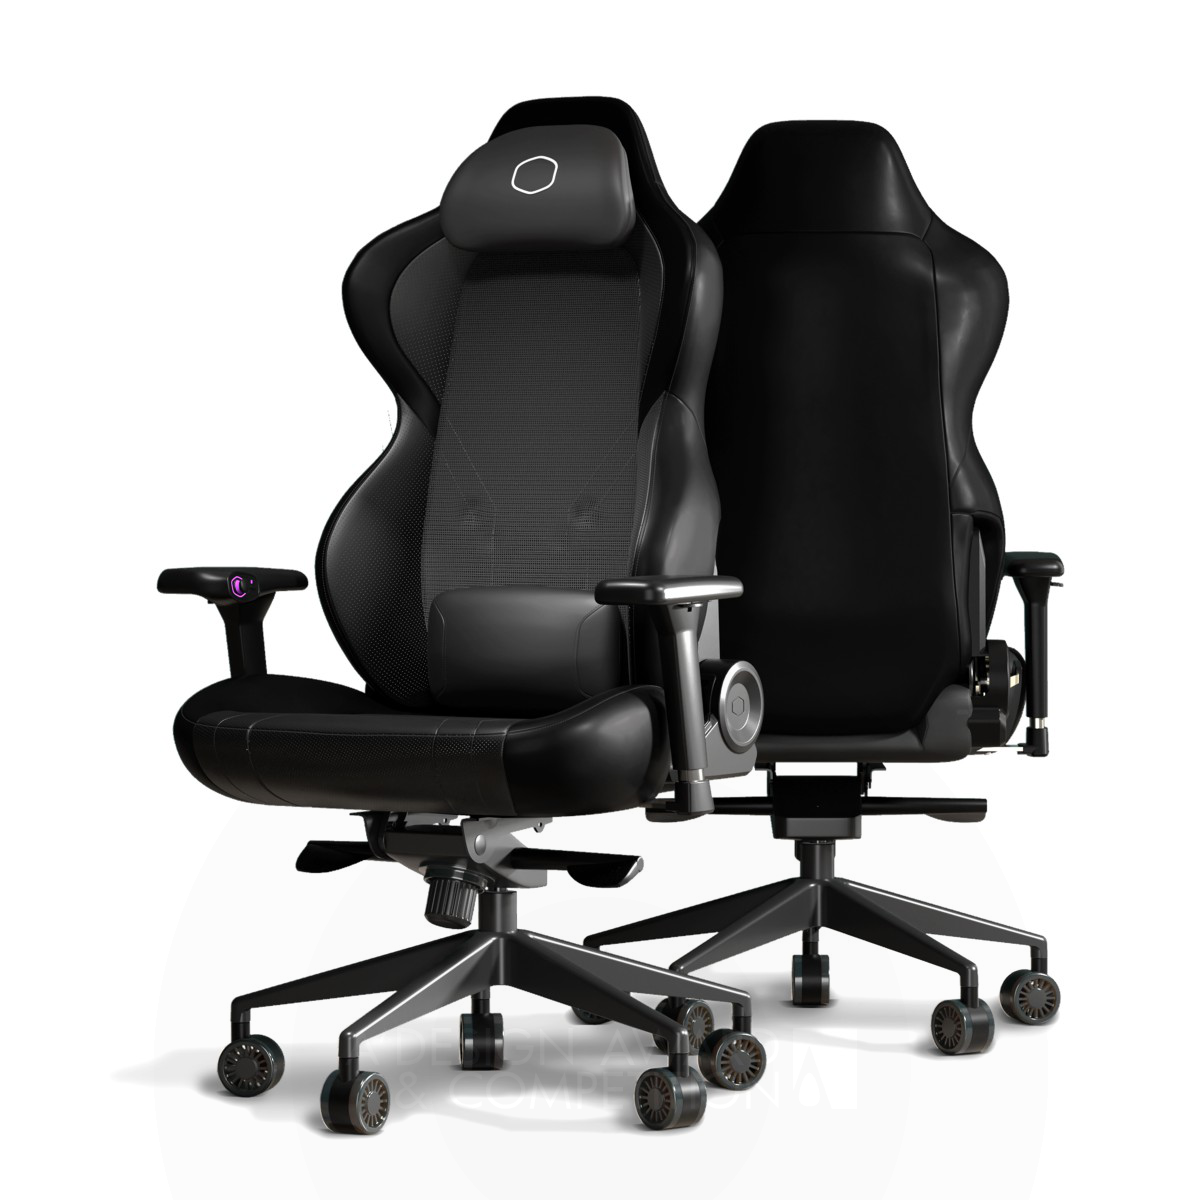 Prompong Hakk wins Silver at the prestigious A' Office Furniture Design Award with Hybrid M Gaming Chair.